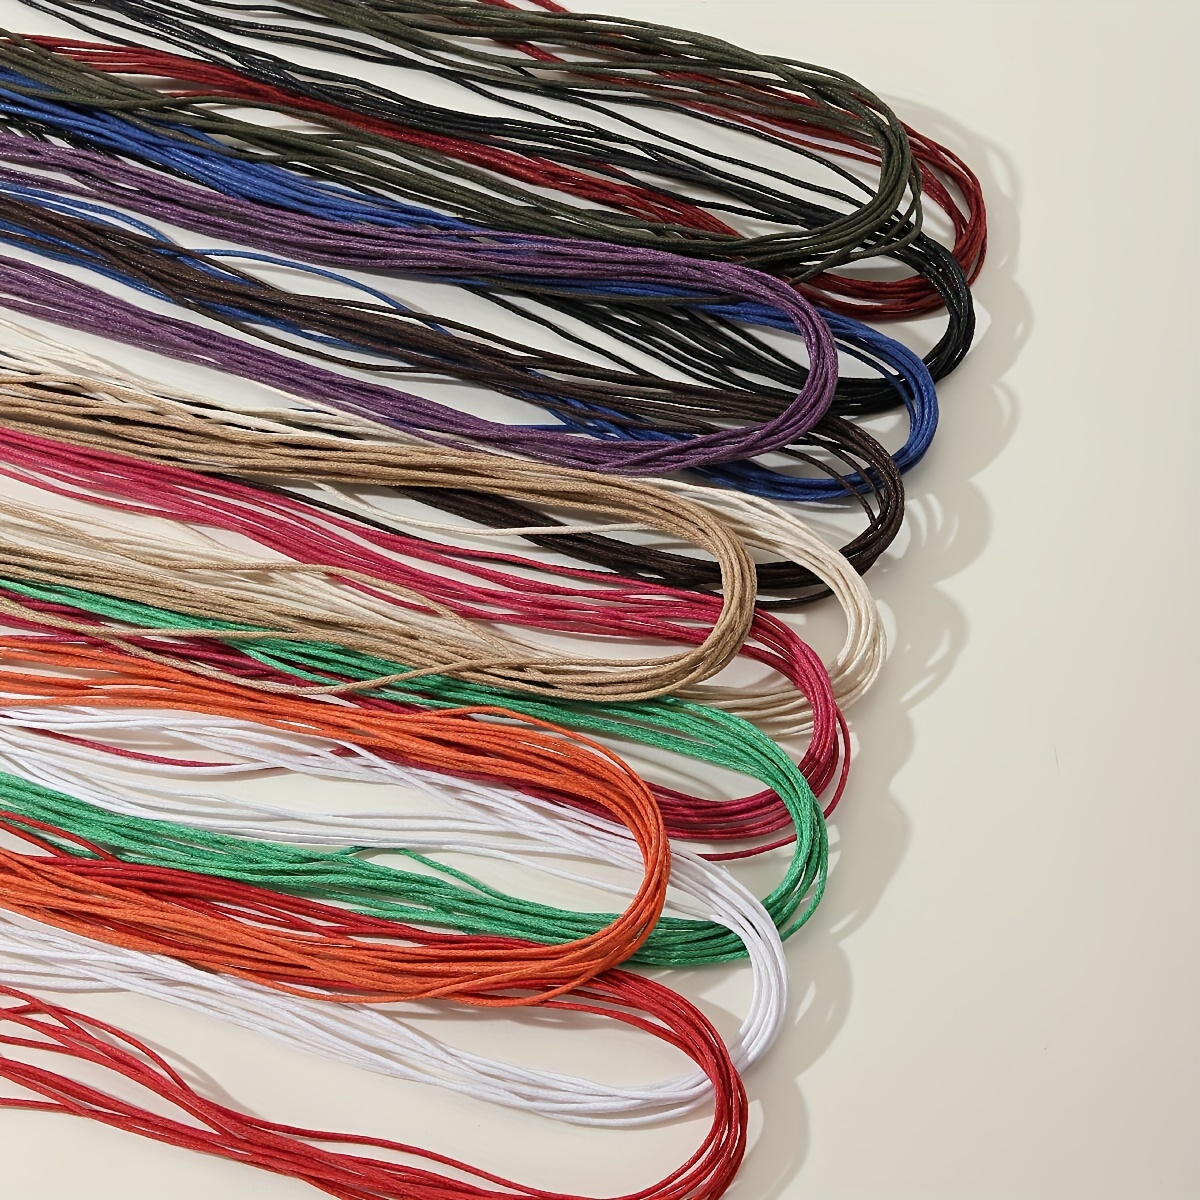 All in One 10 Color 50 Yards Twisted Paper Craft String/Cord/Rope